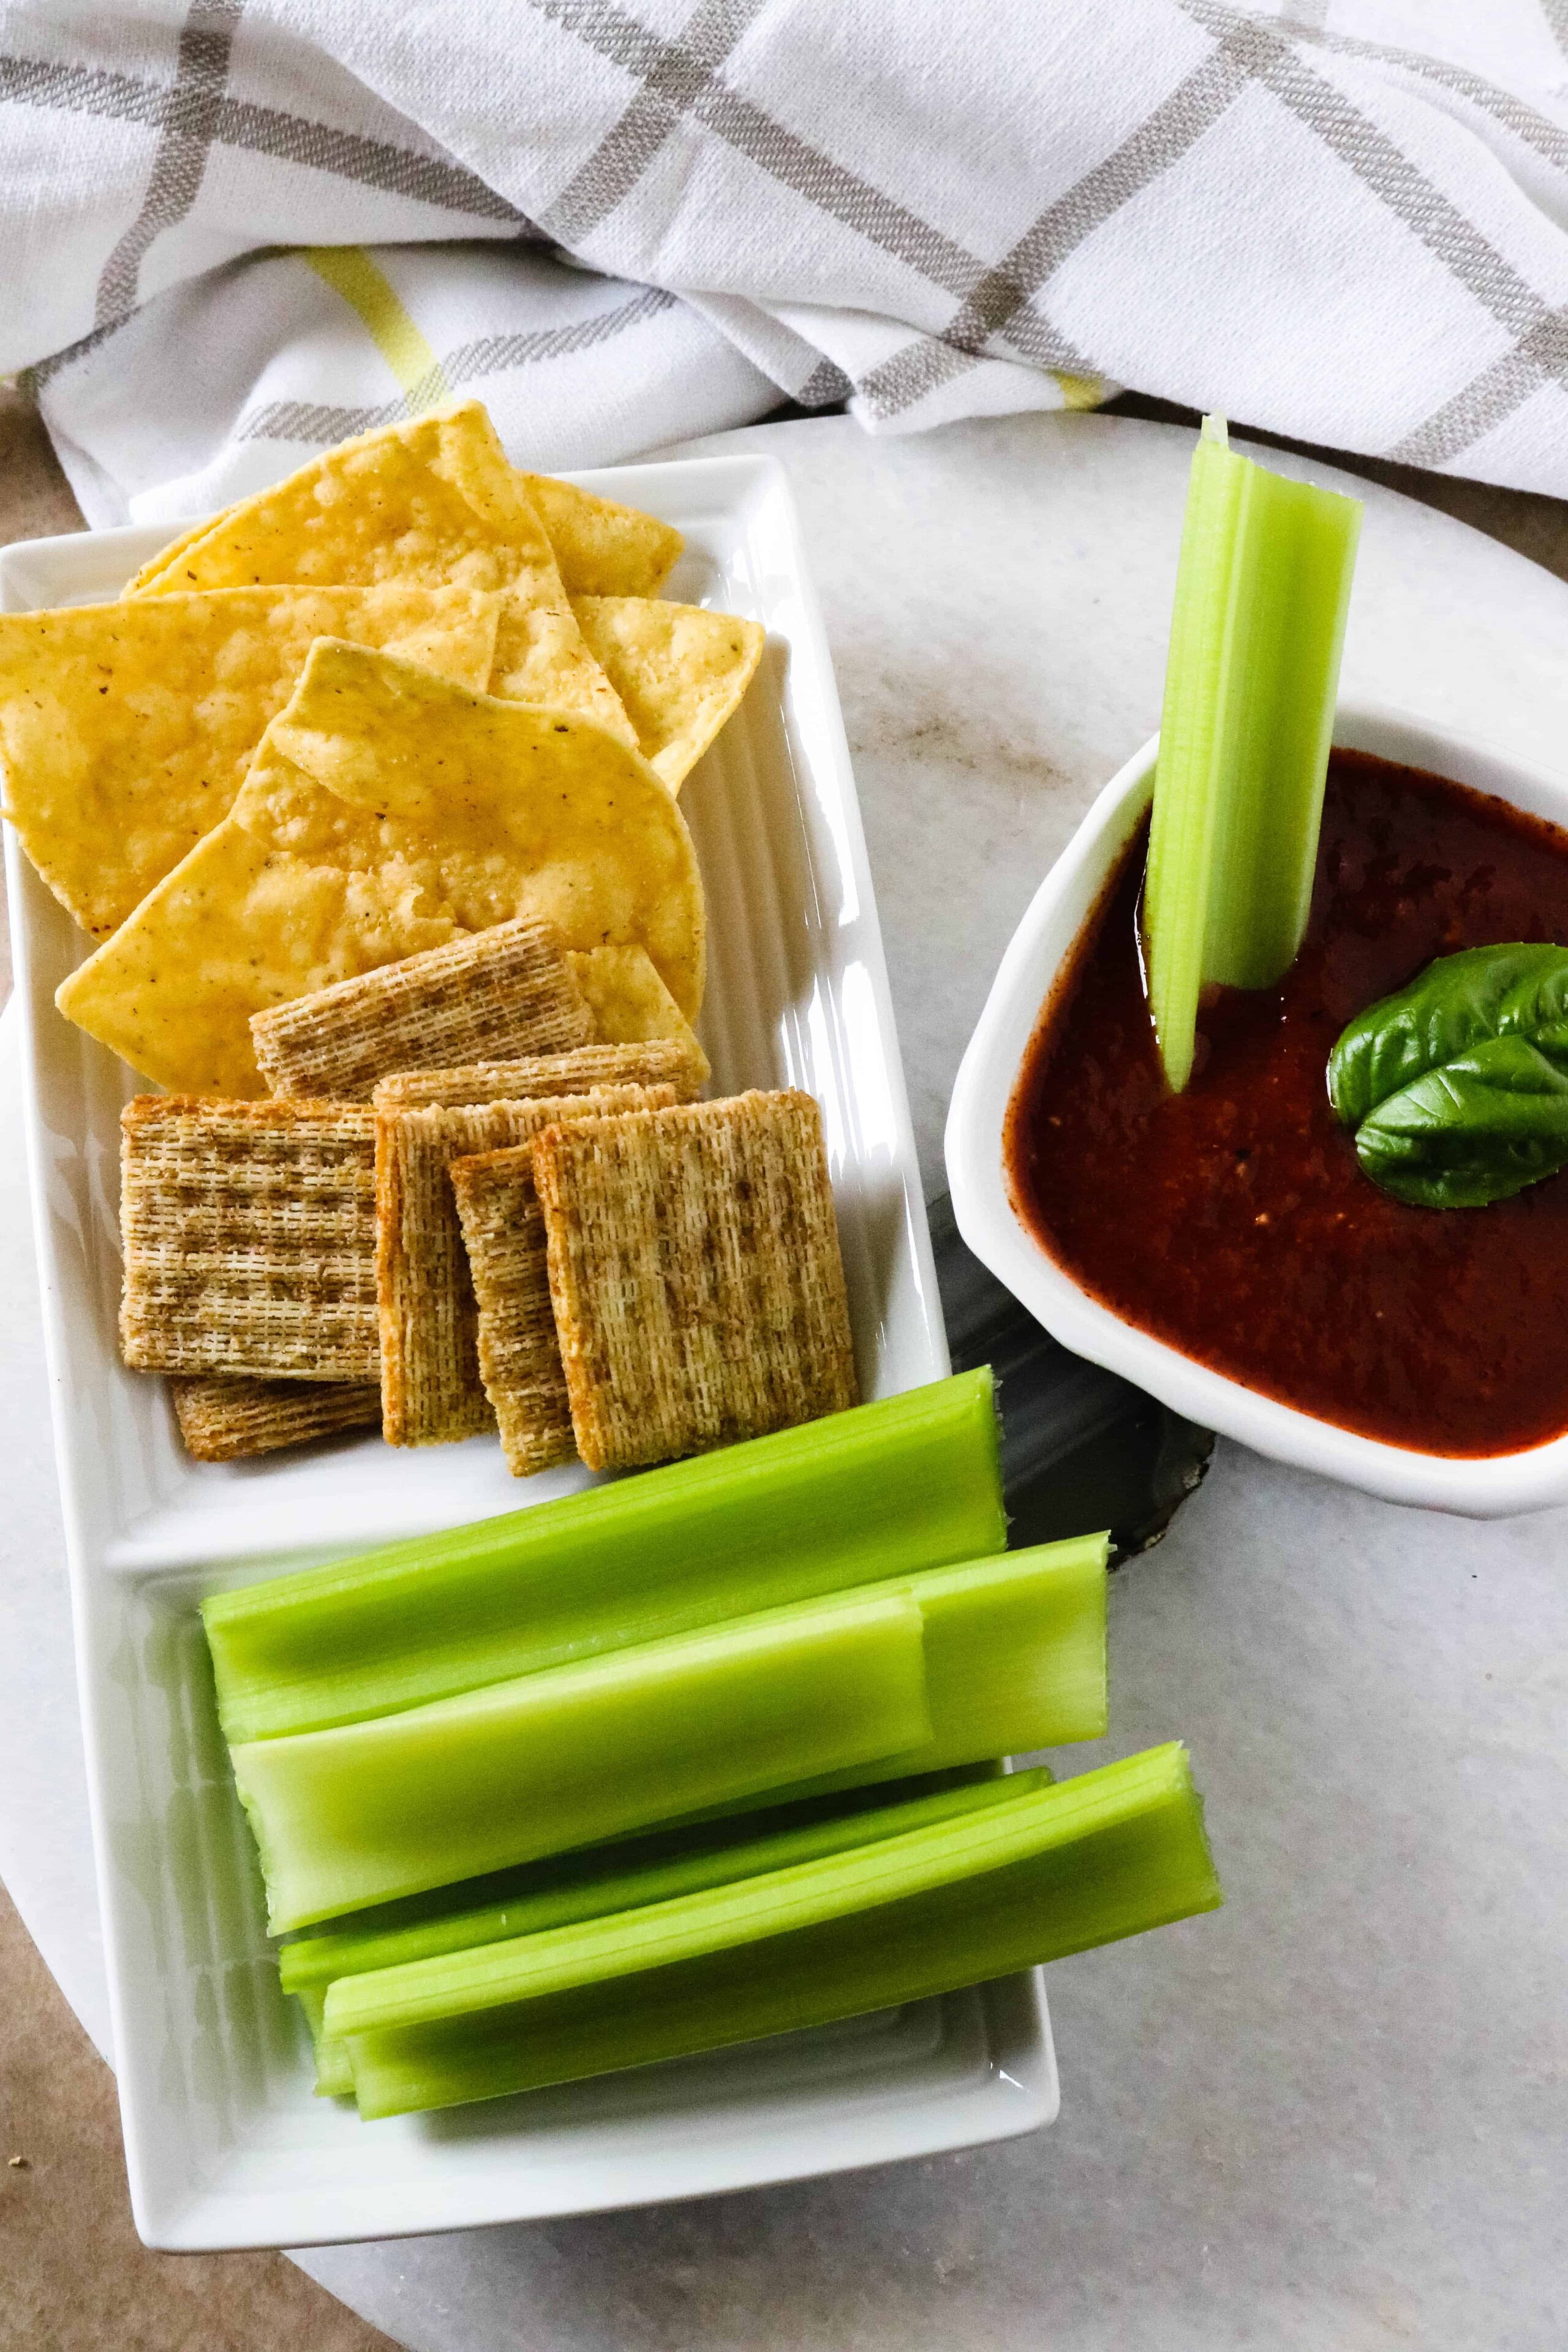 White plate with crackers, tortilla chips and celery in foreground. Small white bowl of Roasted Red Pepper dip to the right